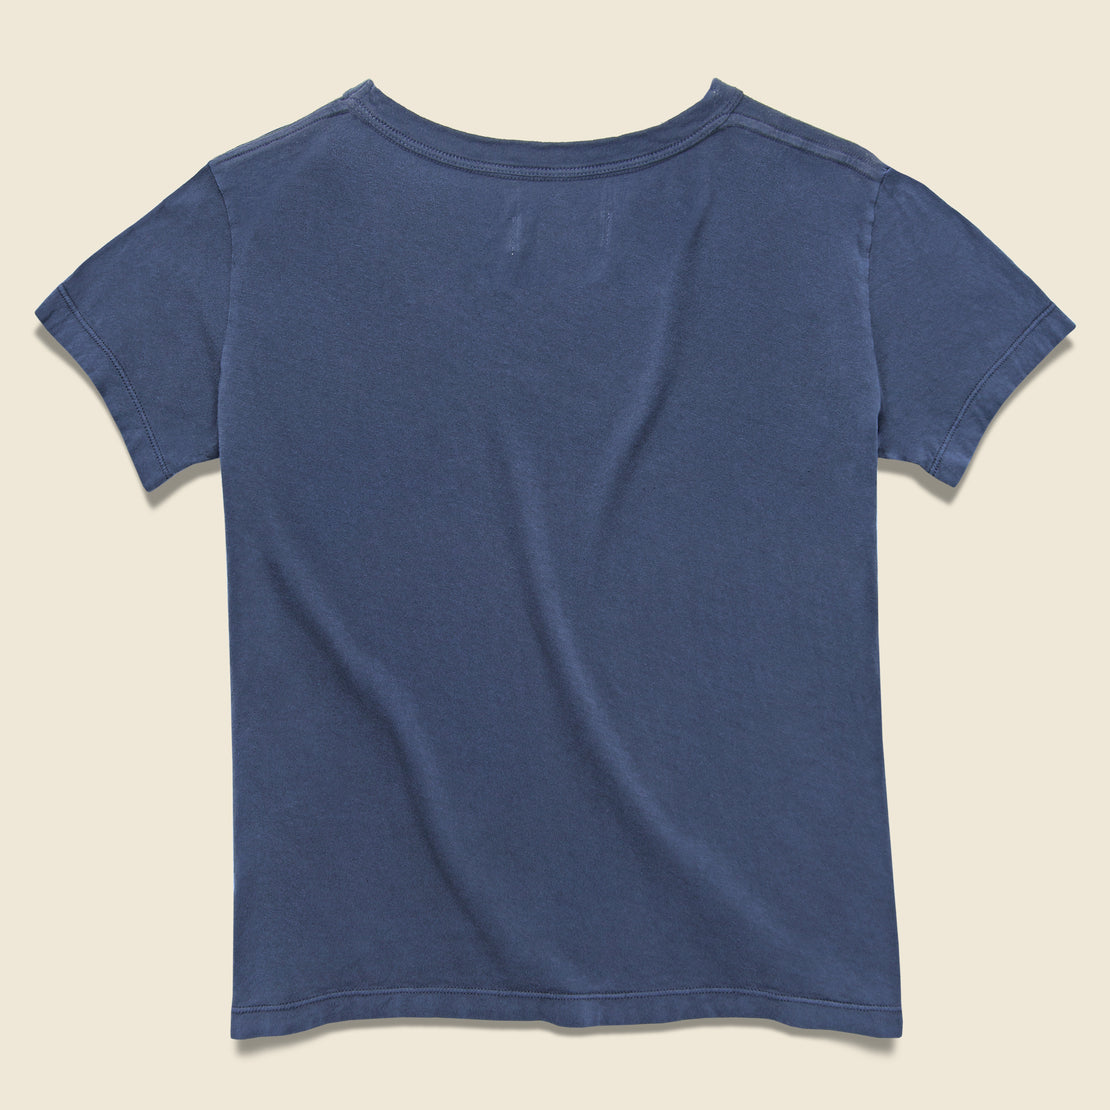 Drop Tee - Faded Blue - Imogene + Willie - STAG Provisions - W - Tops - S/S Tee